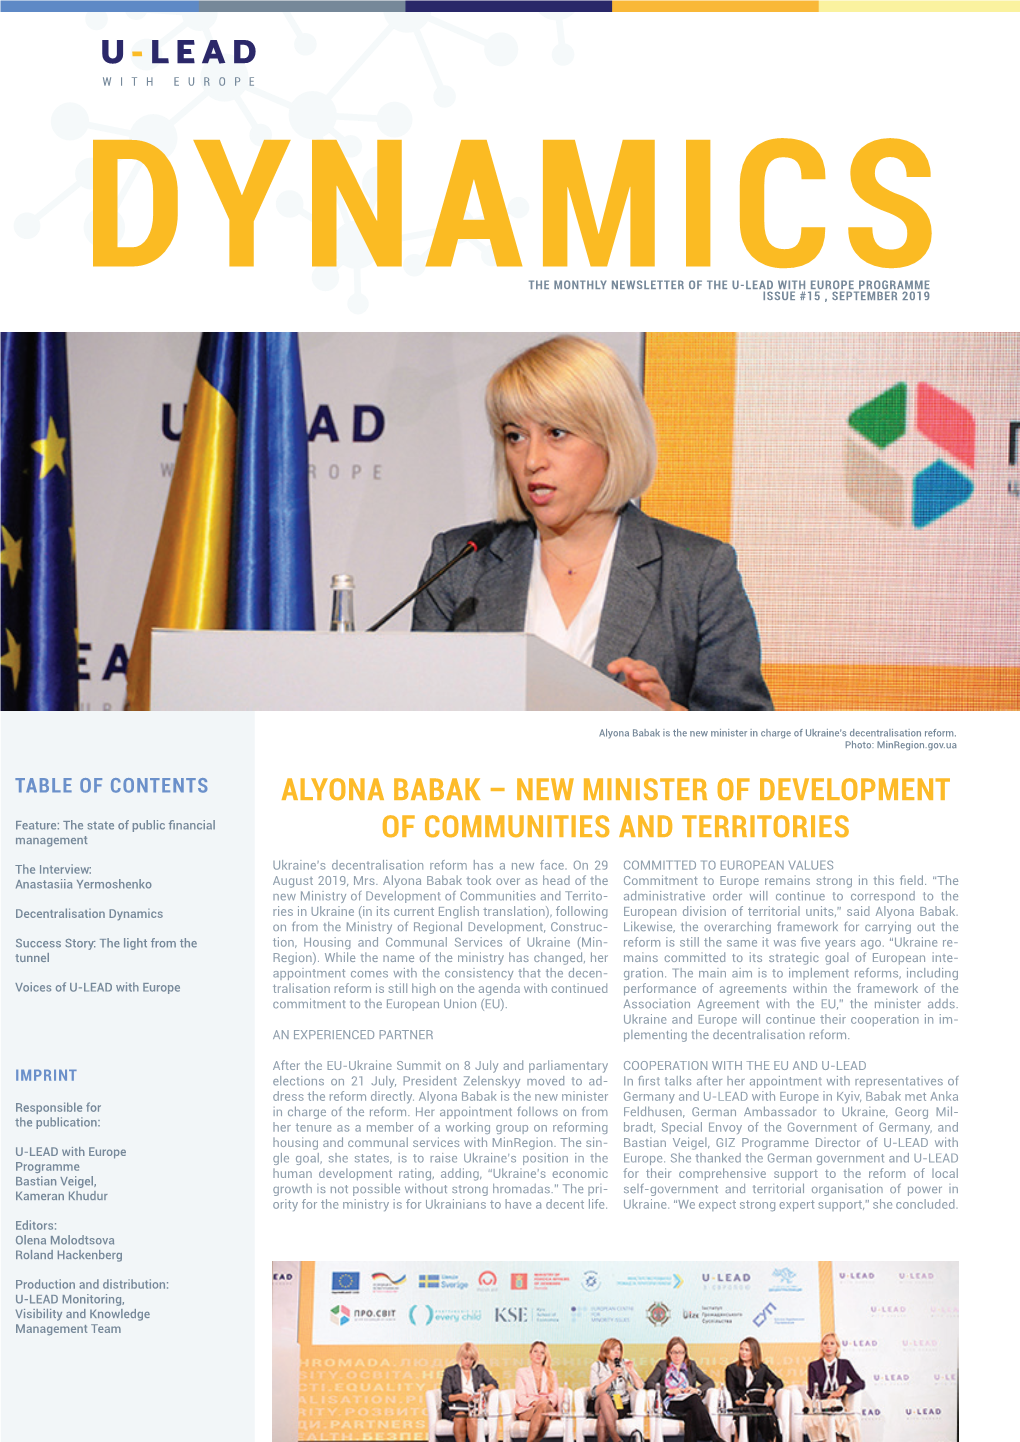 Alyona Babak – New Minister of Development of Communities and Territories